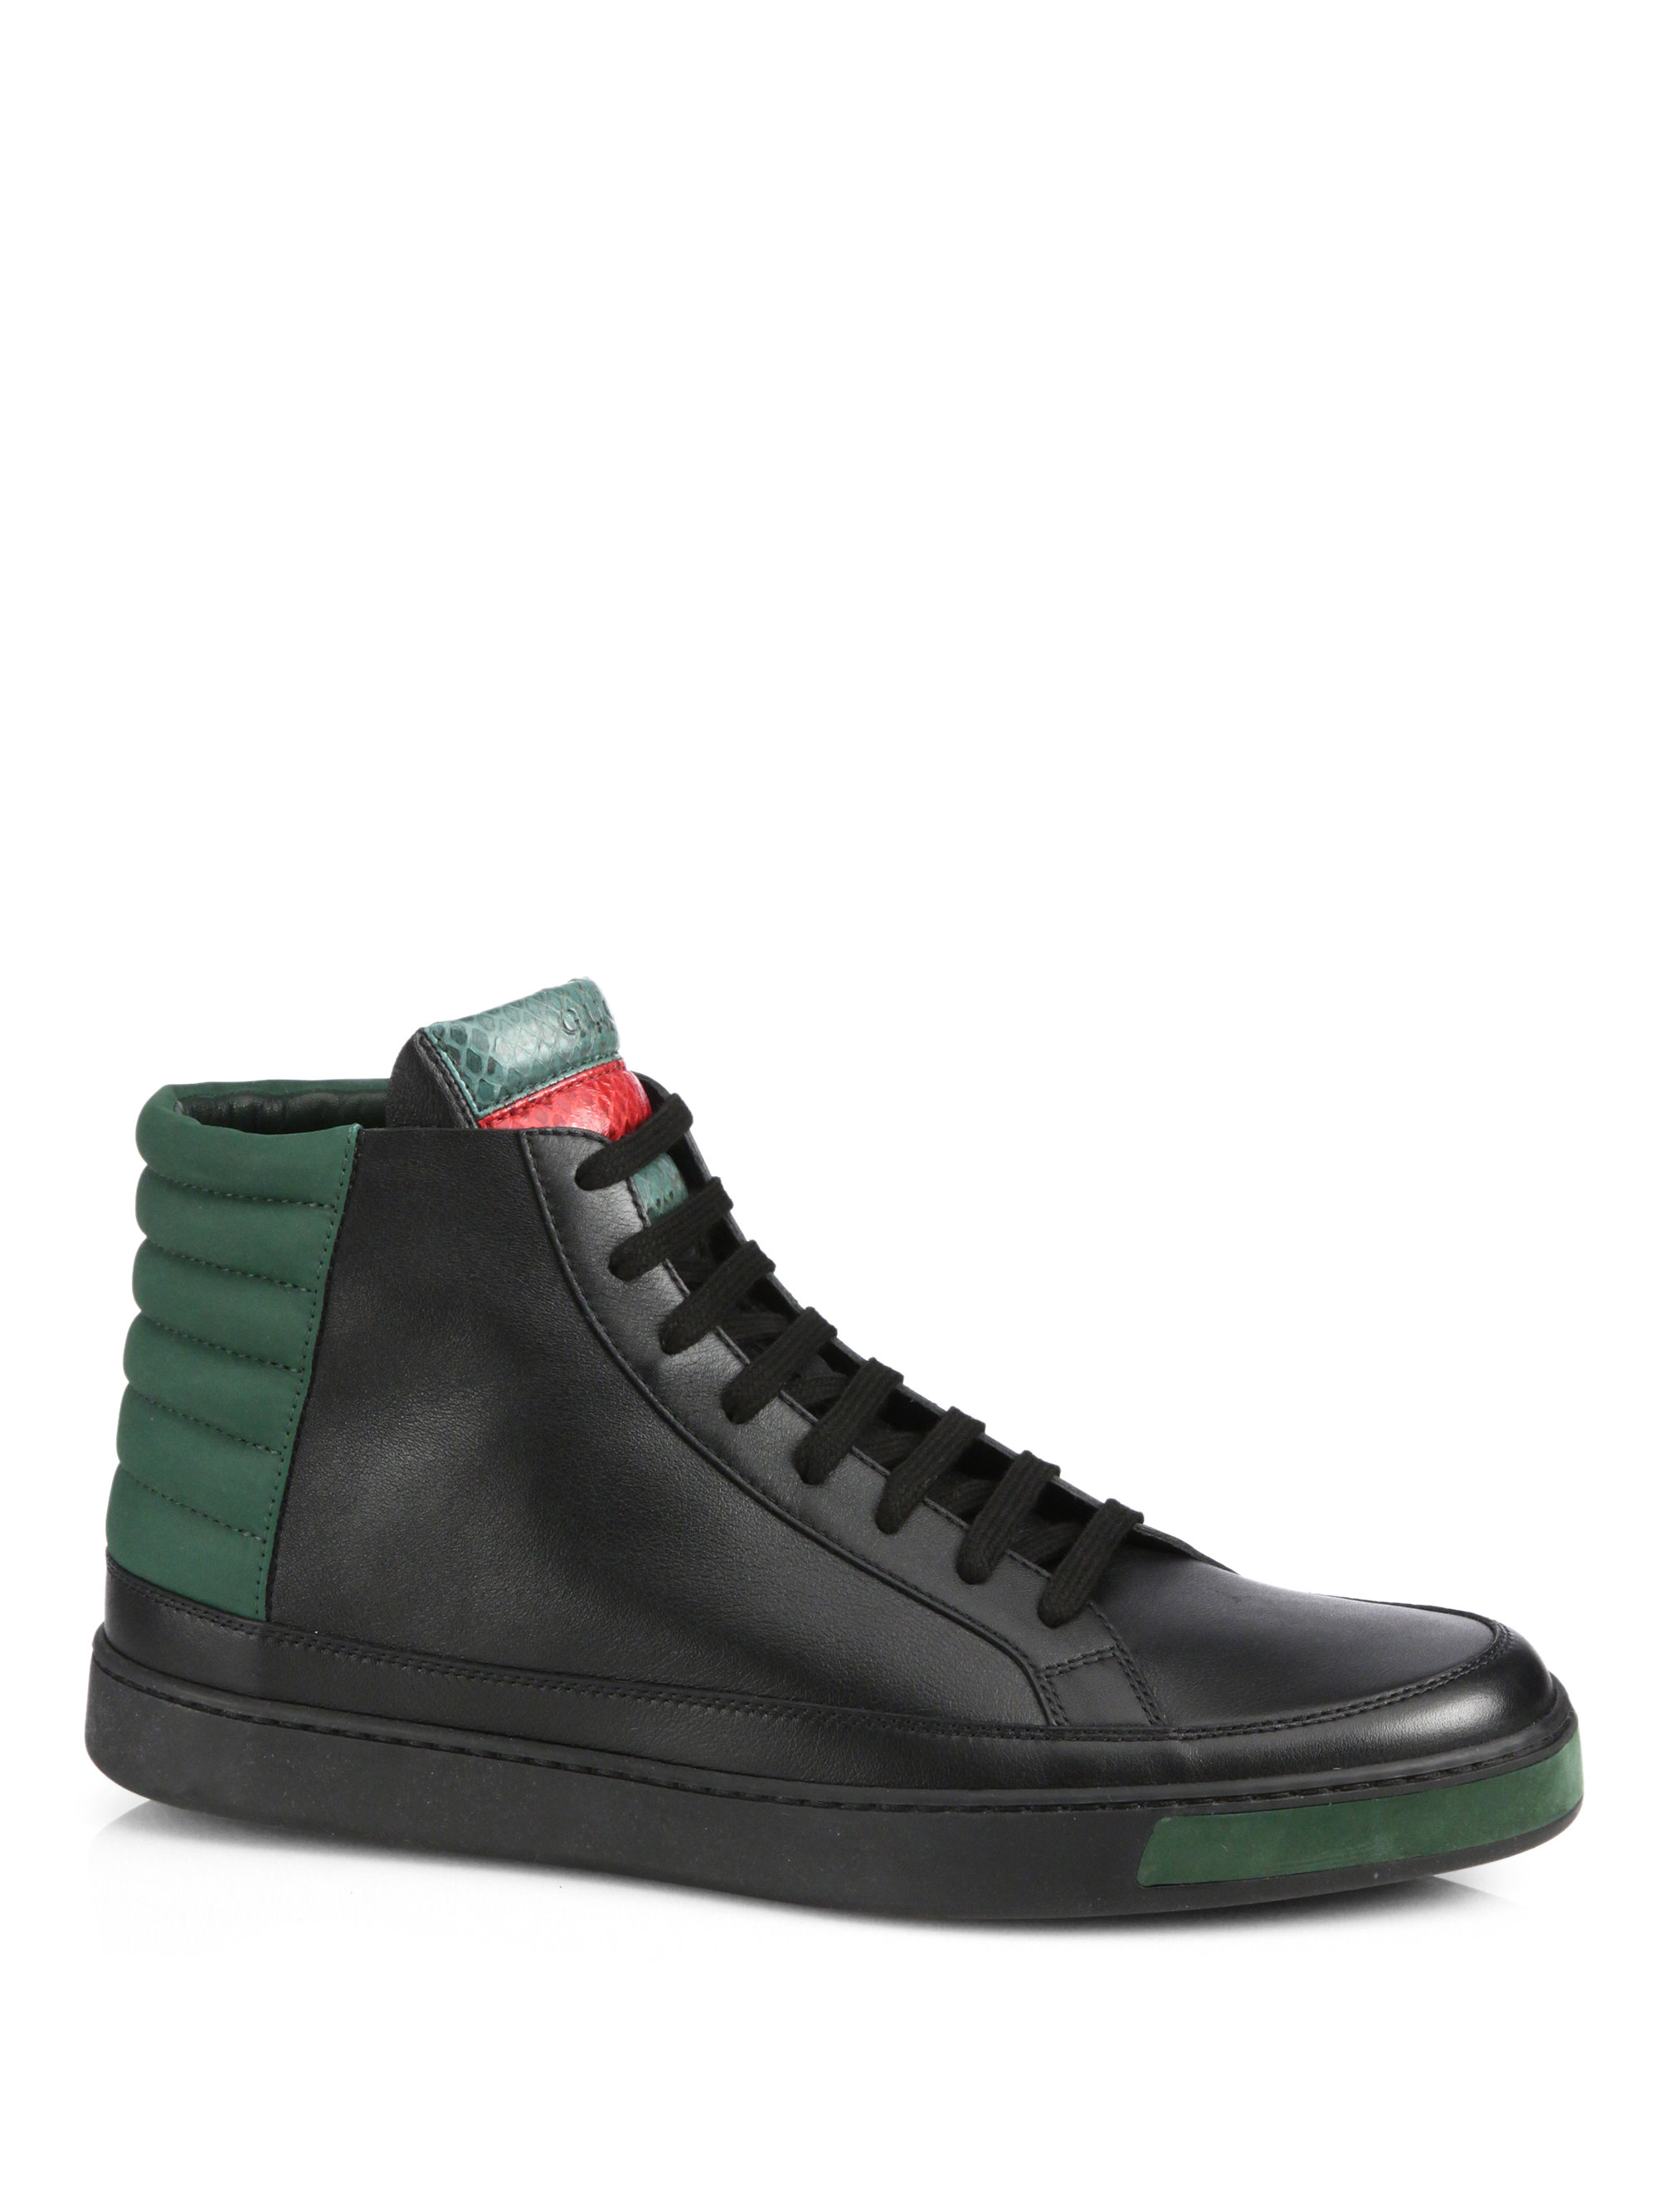 Lyst - Gucci Leather, Suede & Lizard High-top Sneakers in Black for Men